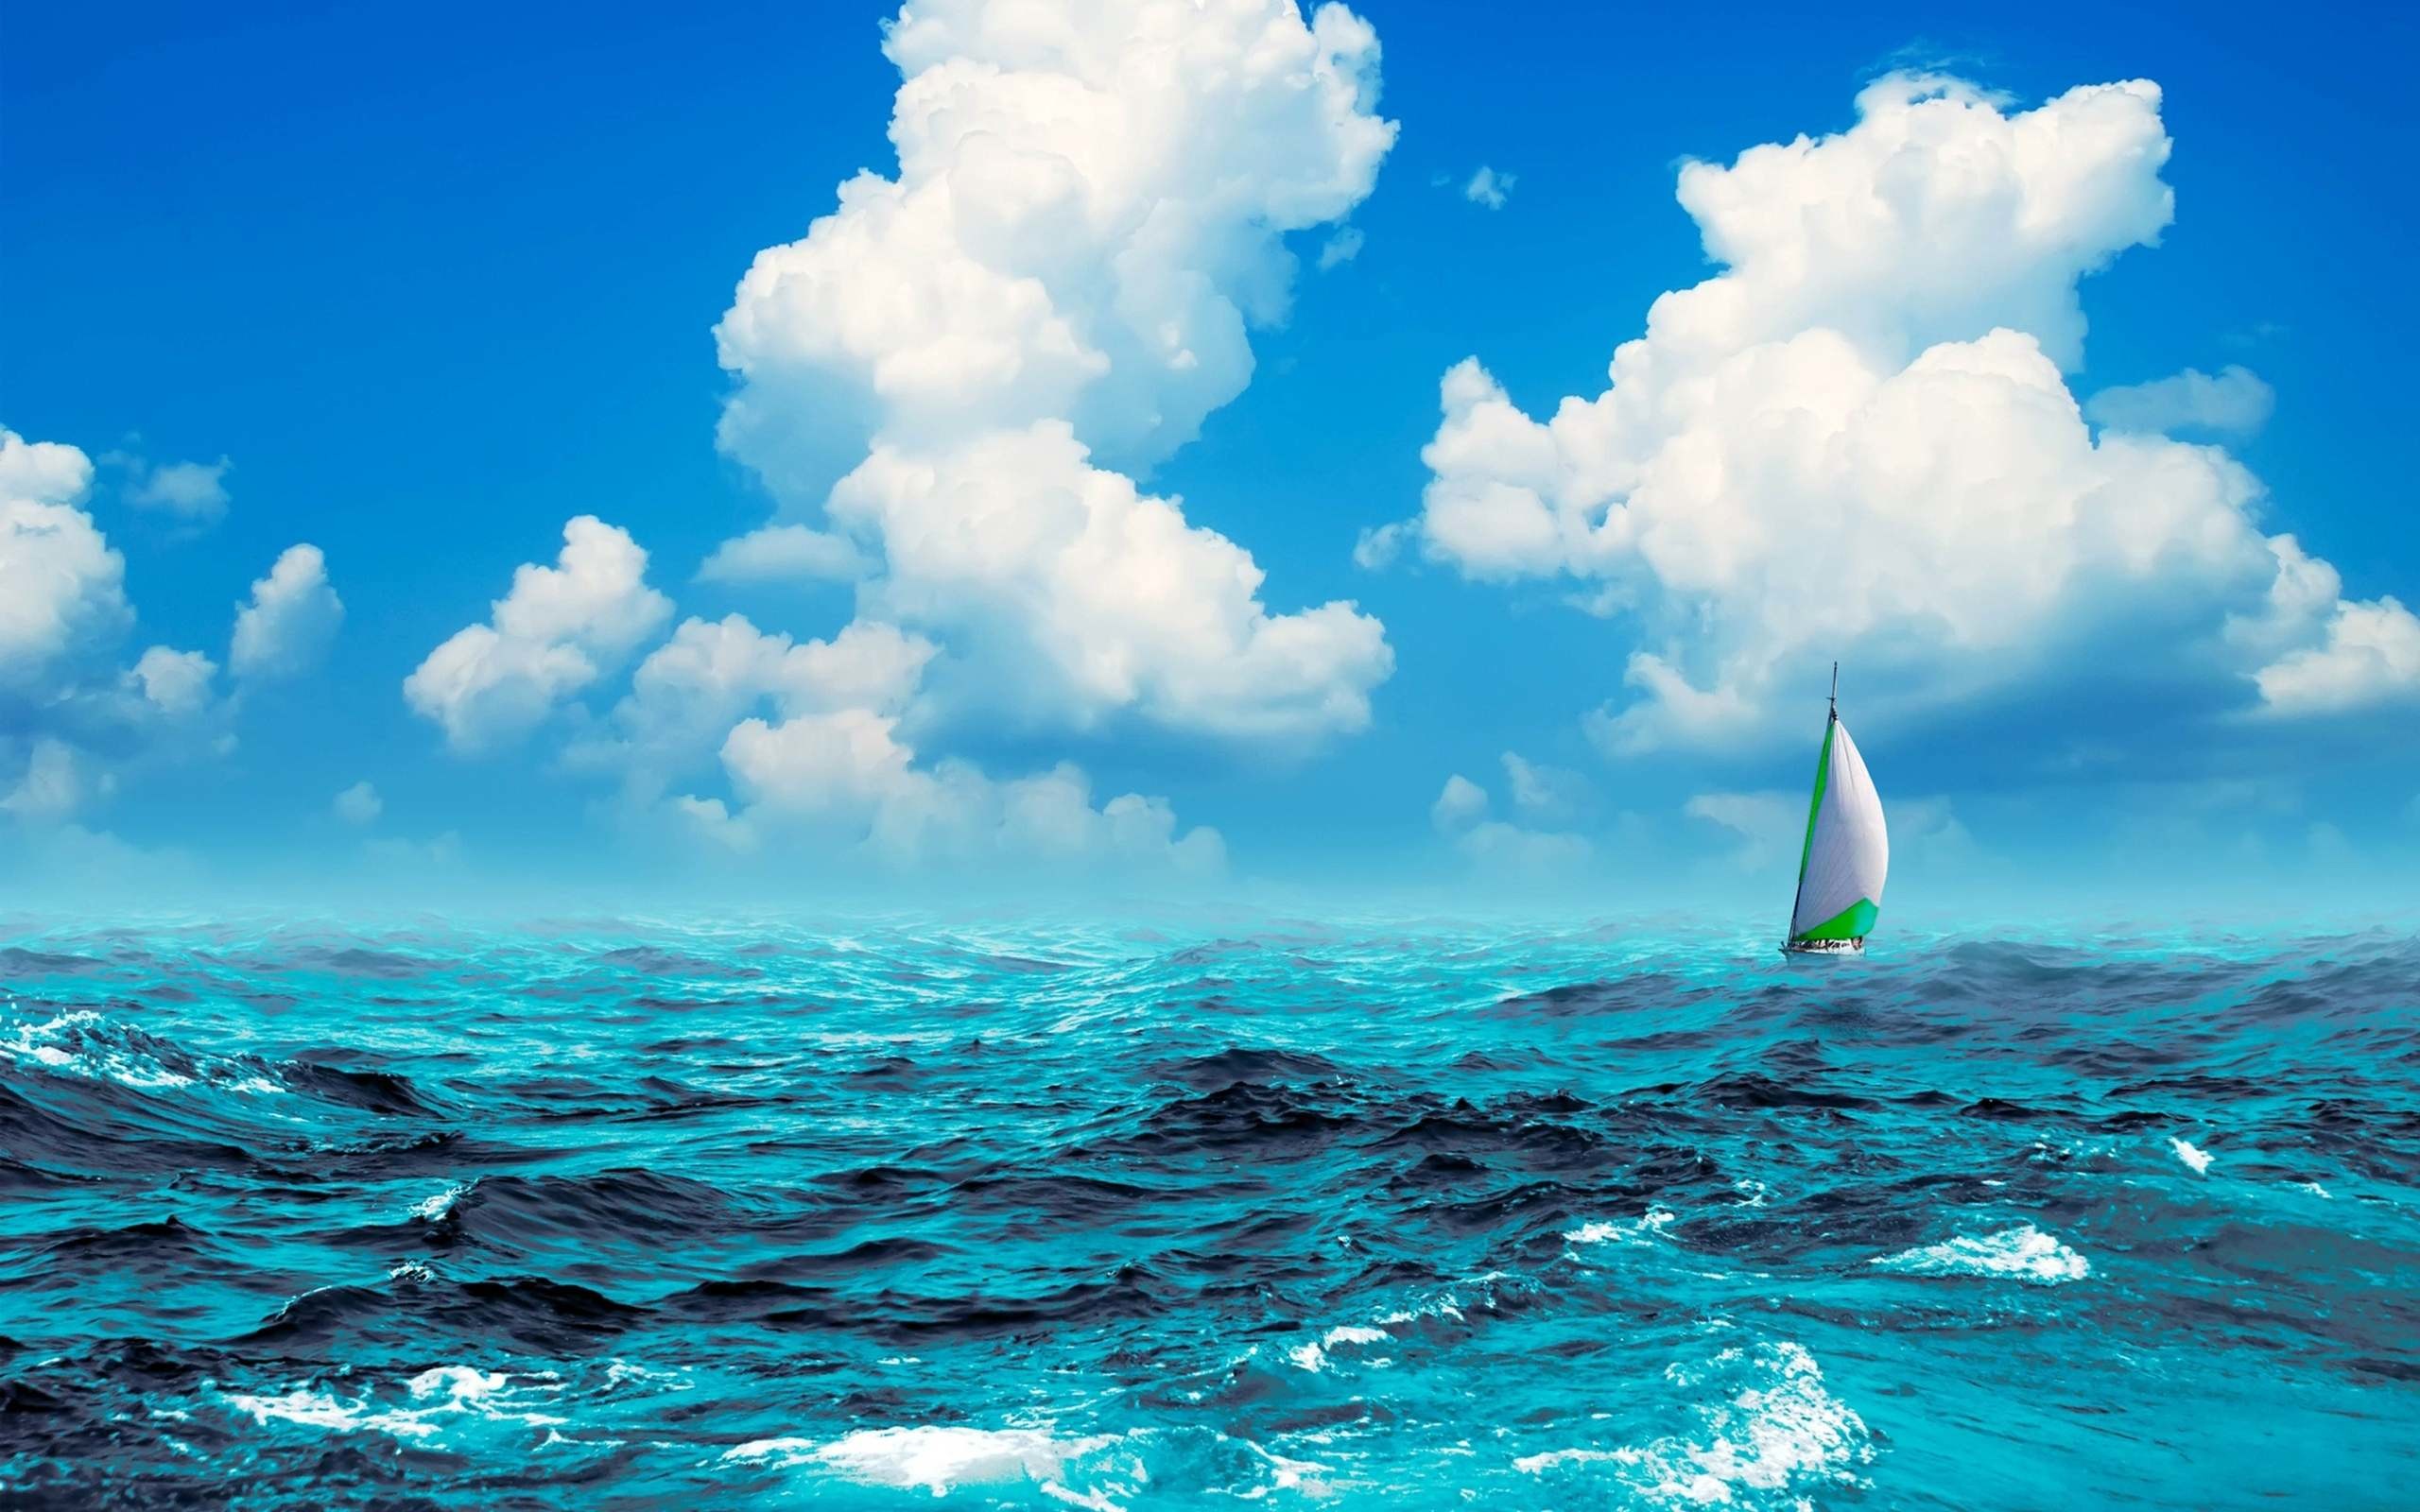 2560x1600 Sail, Boat, In, The, Sea, Desktop, Background, Wallpaper, Sea, Download,  Free, Windows Wallpaper, Widescreen, Wallpapers For Large Screens, ...